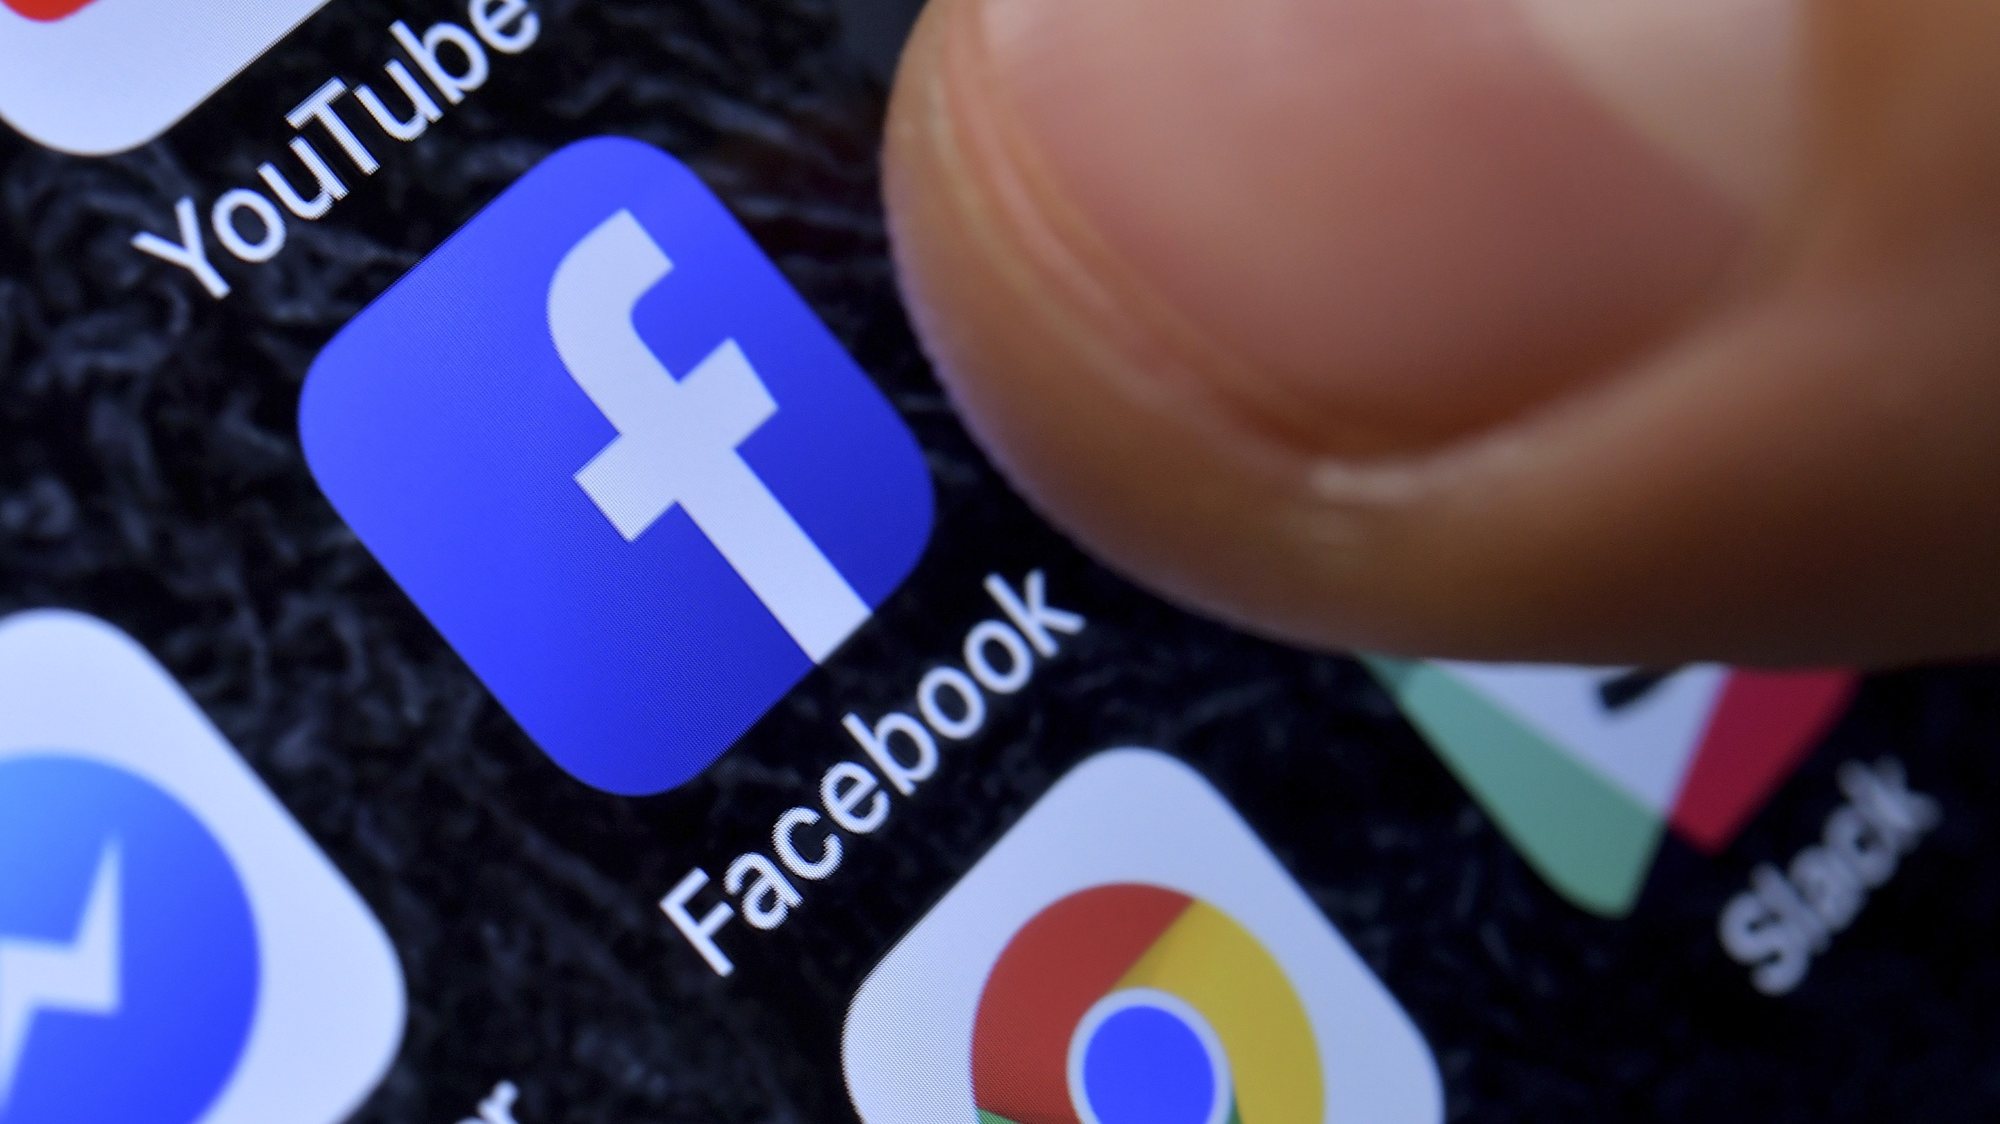 epa08445018 (FILE) - A close-up image showing the Facebook app on an iPhone in Kaarst, Germany, 08 November 2017 (reissued 25 May 2020). German federal court, BGH, is due to announce its long awaited decision 29 May 2020 in data protection lawsuit in a consumer centres vs Facebook case.  EPA/SASCHA STEINBACH *** Local Caption *** 55831121